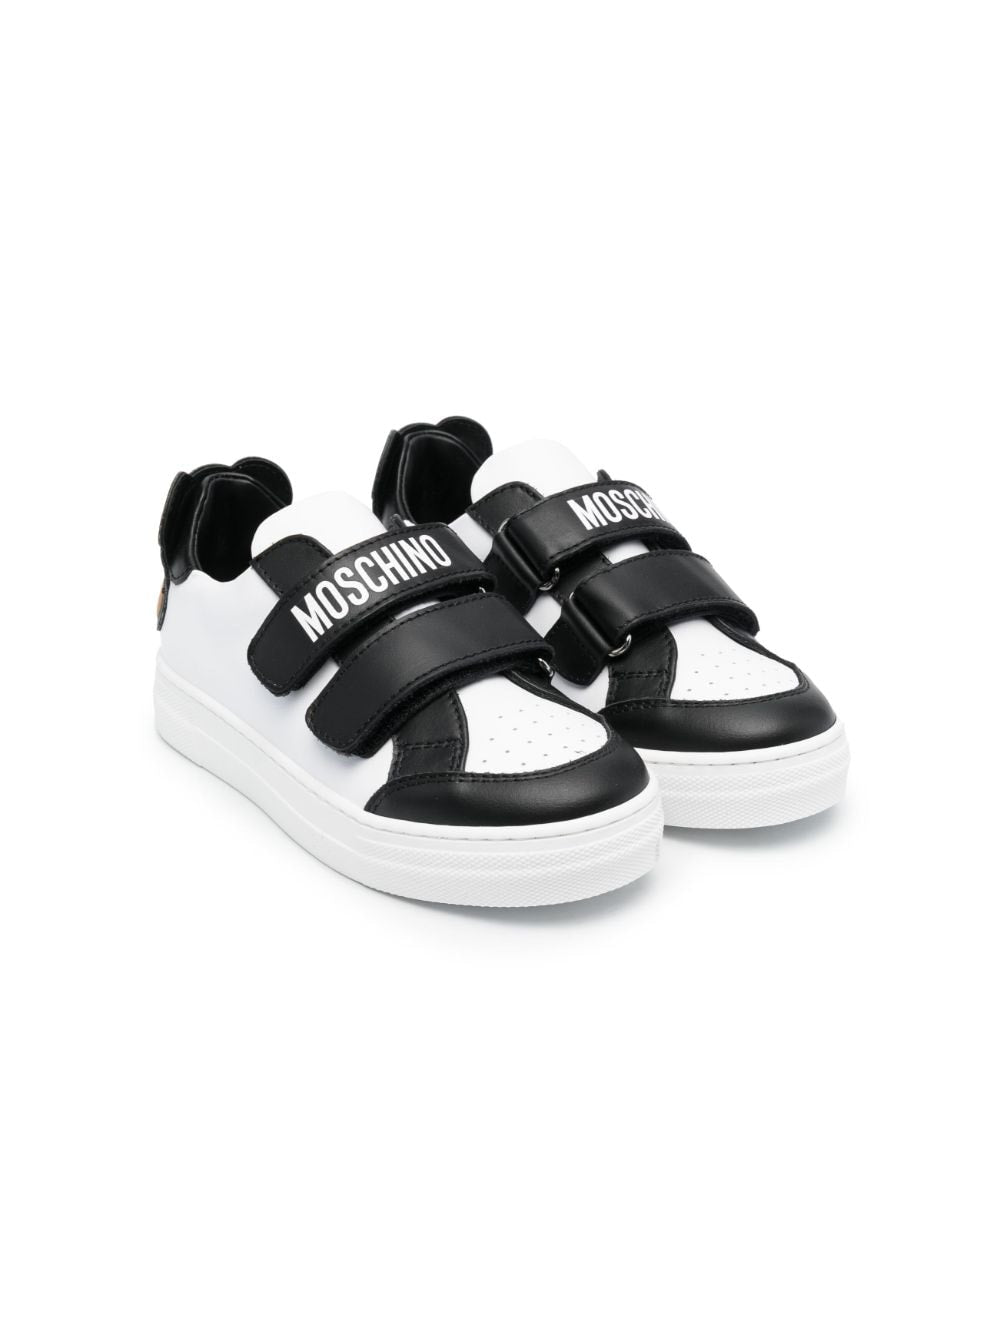 Black and white sneakers for children